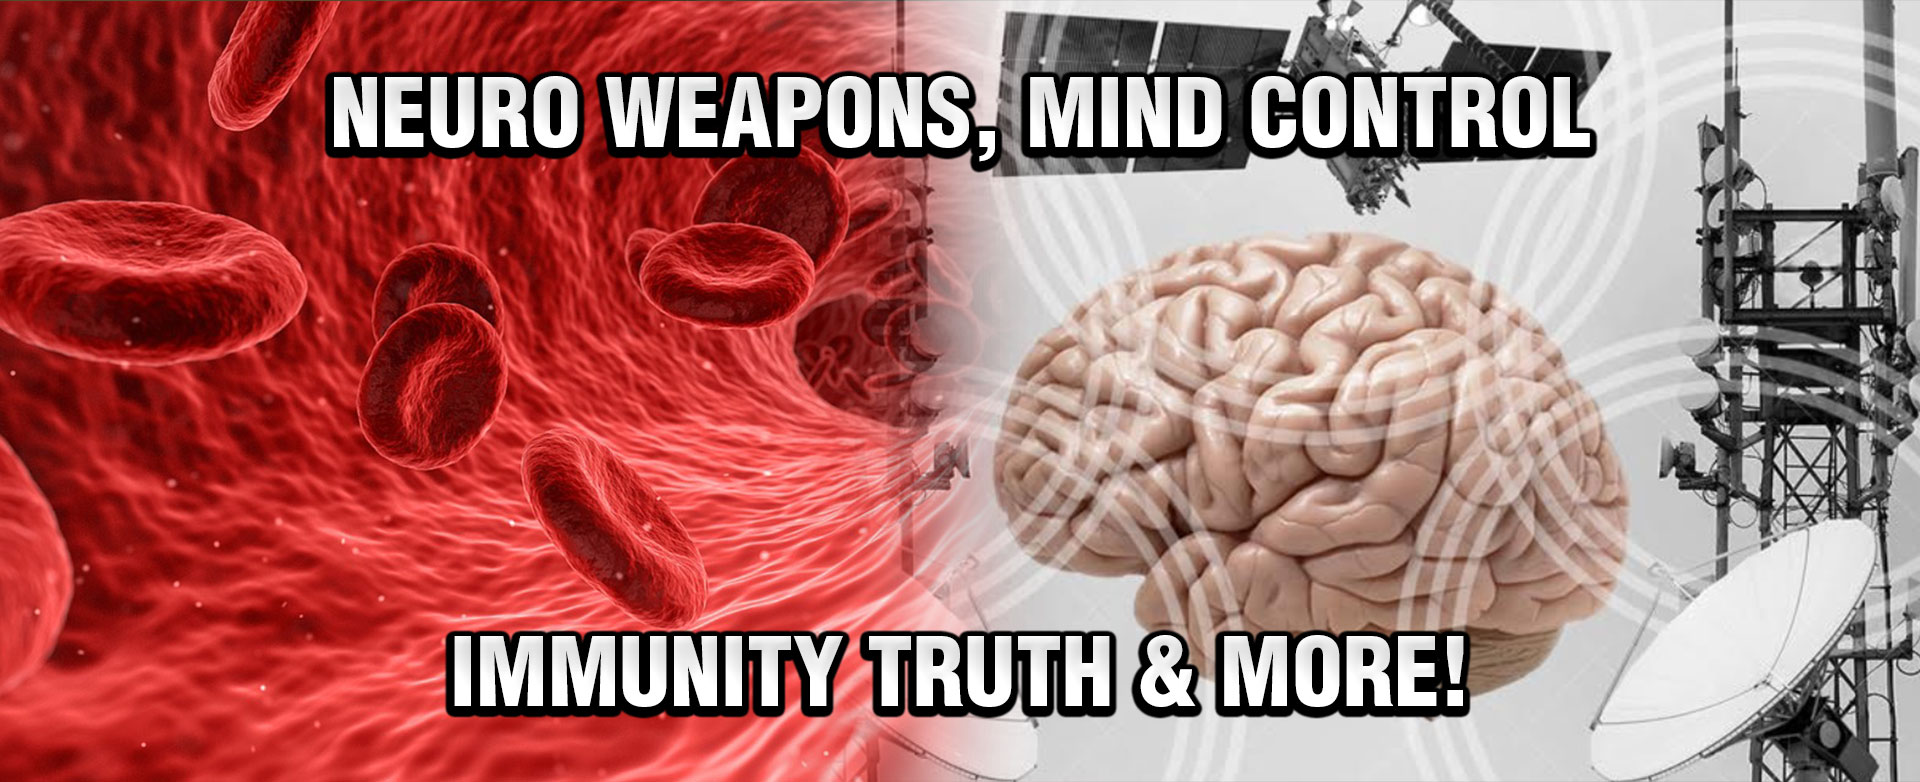 MyPatriotsNetwork-Neuro Weapons, Mind Control, Immunity Truth & More! March 20, 2021 Update